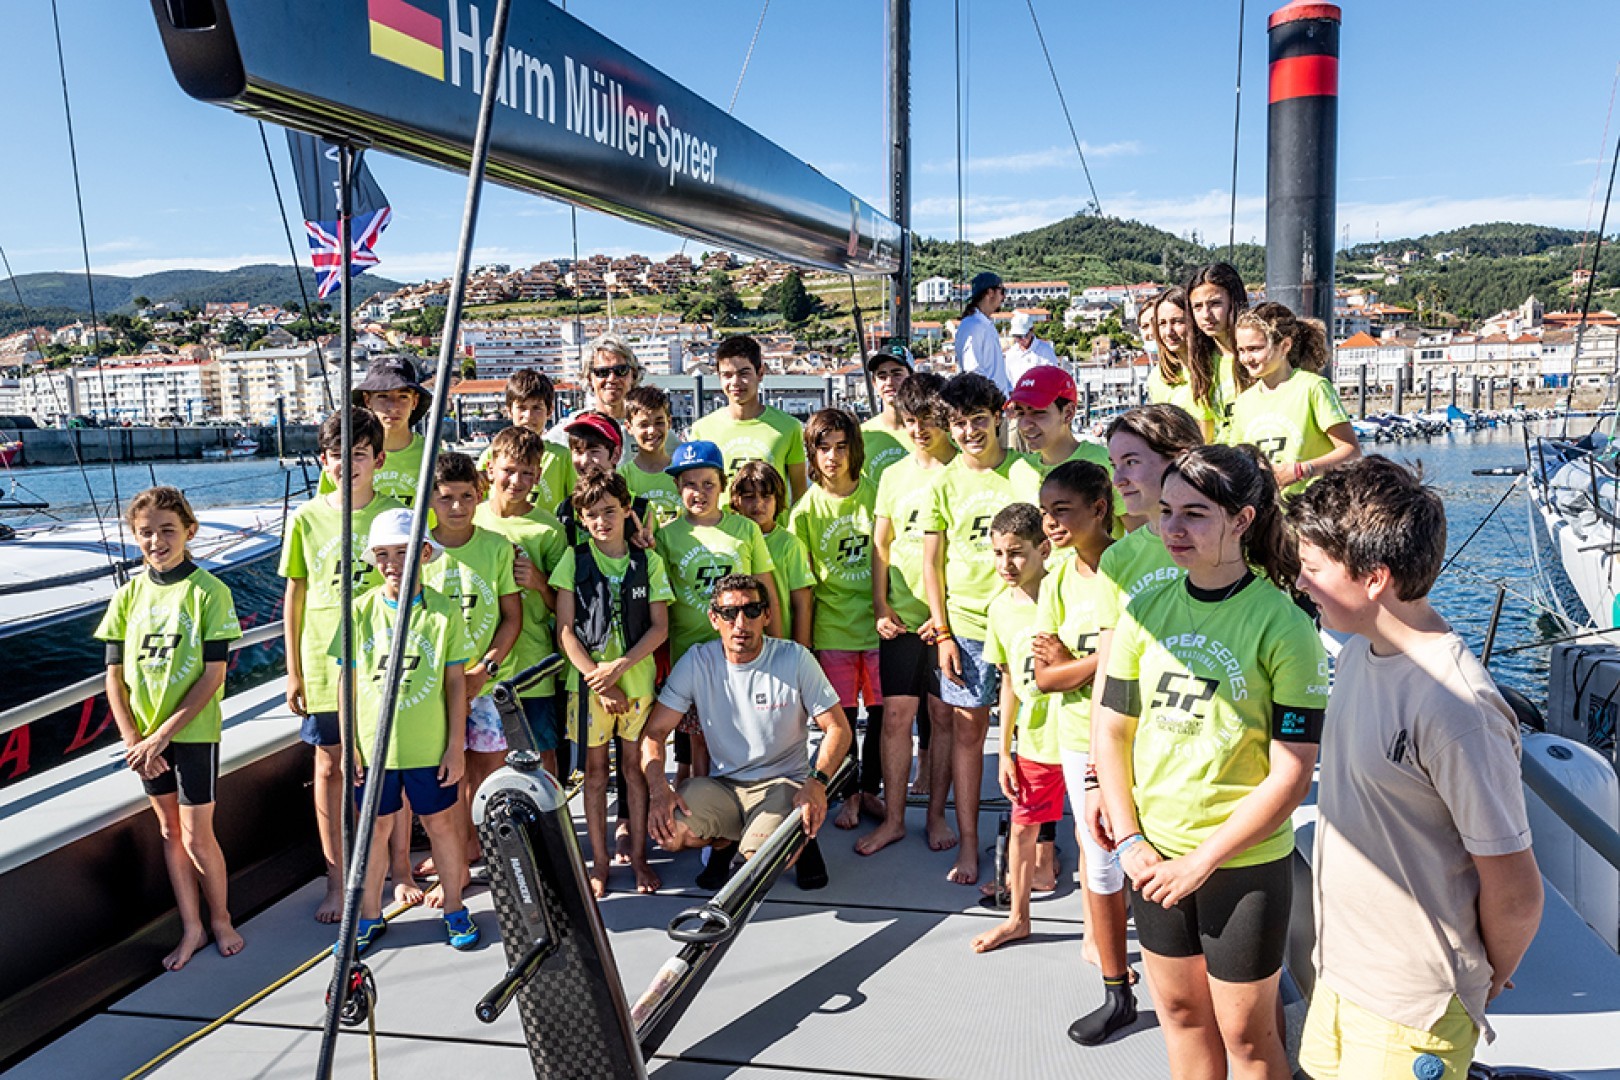 Multi Dimensional Sustainability Programme Is a 2022 Success Story For the 52 Super Series, Now For 2023